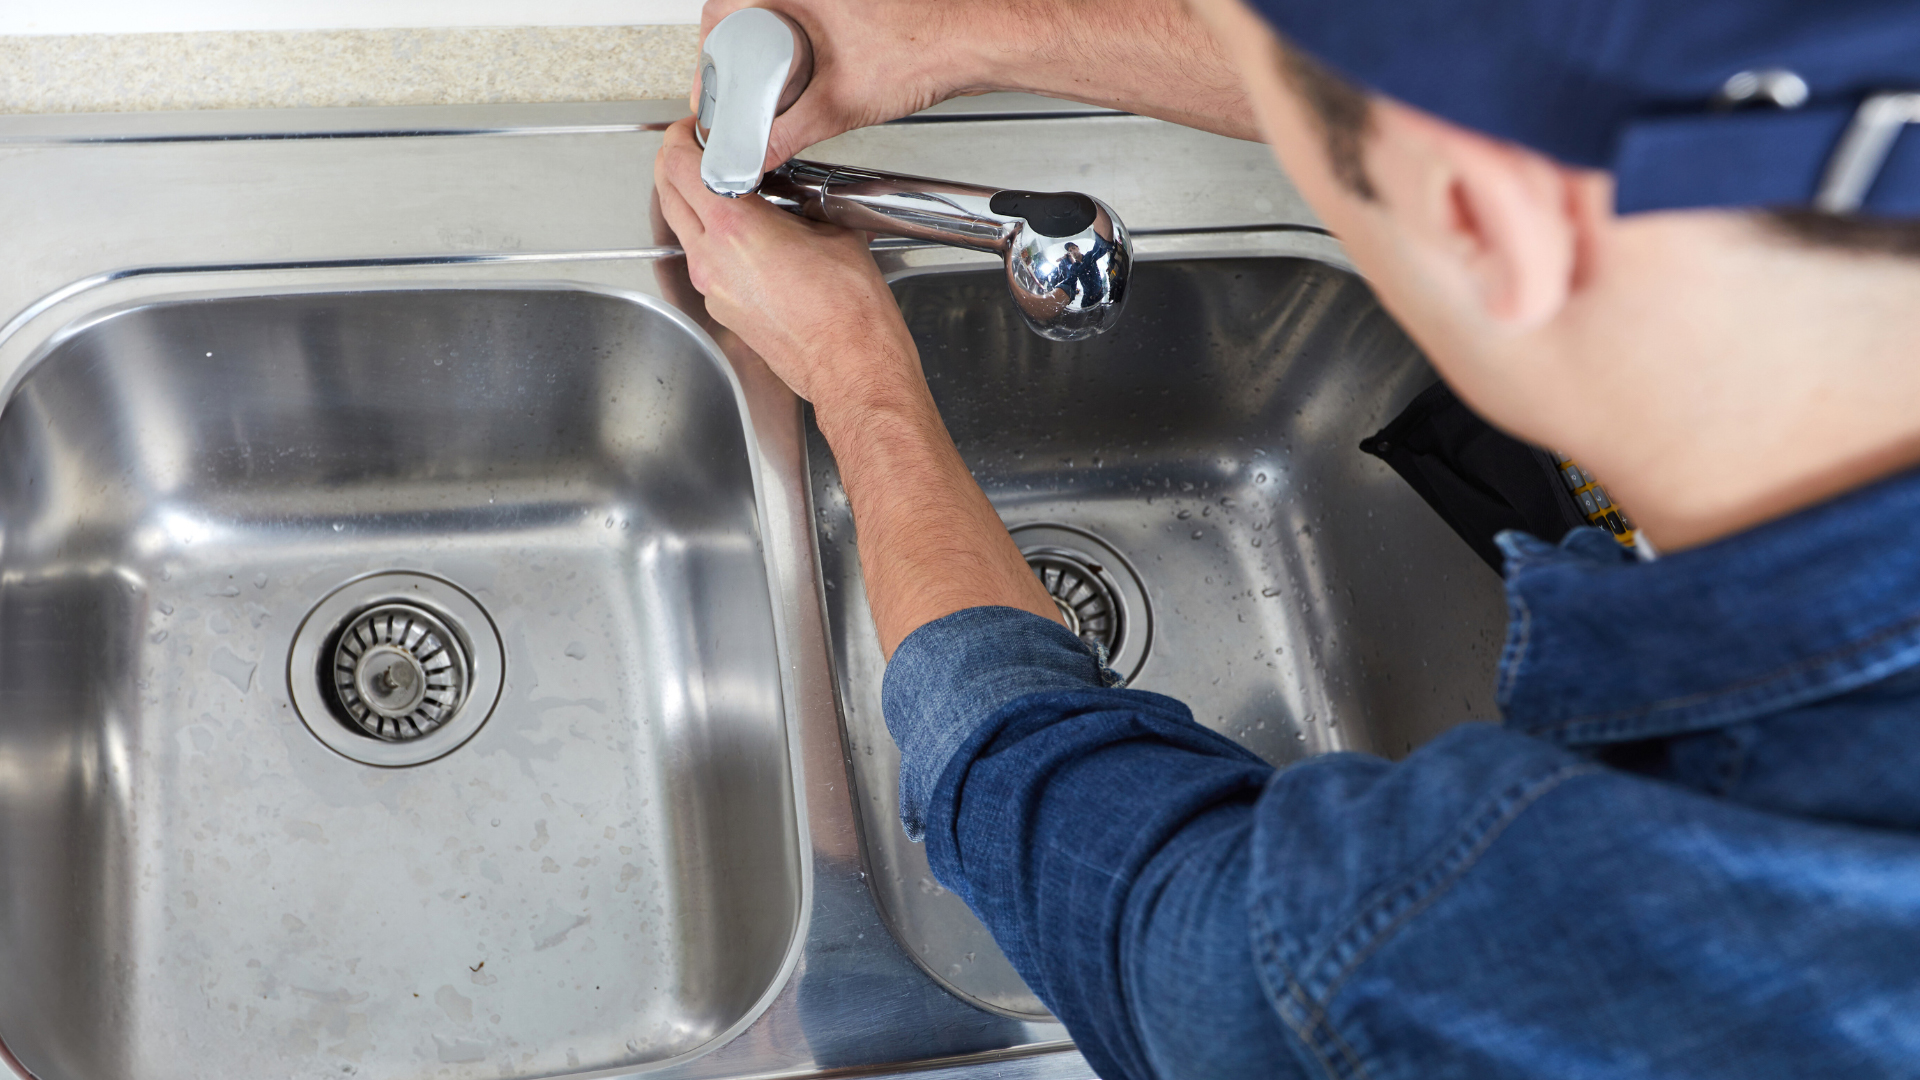 Faucet Repair & Installation in Charleston, SC from Fix-it 24/7 Air Conditioning, Plumbing & Heating